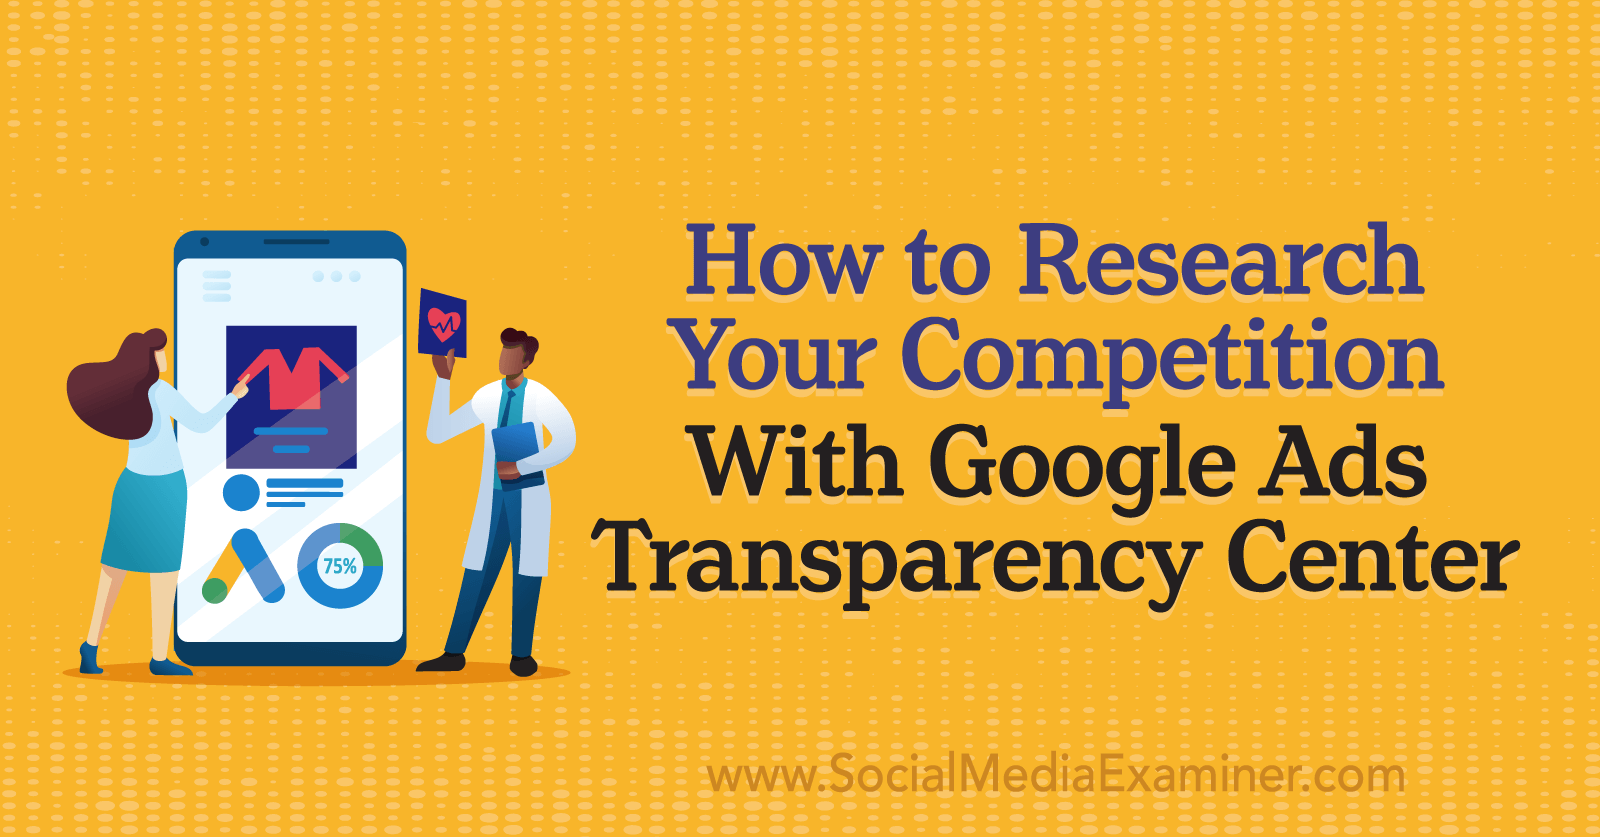 How to Research Your Competition With Google Ads Transparency Center by Social Media Examiner